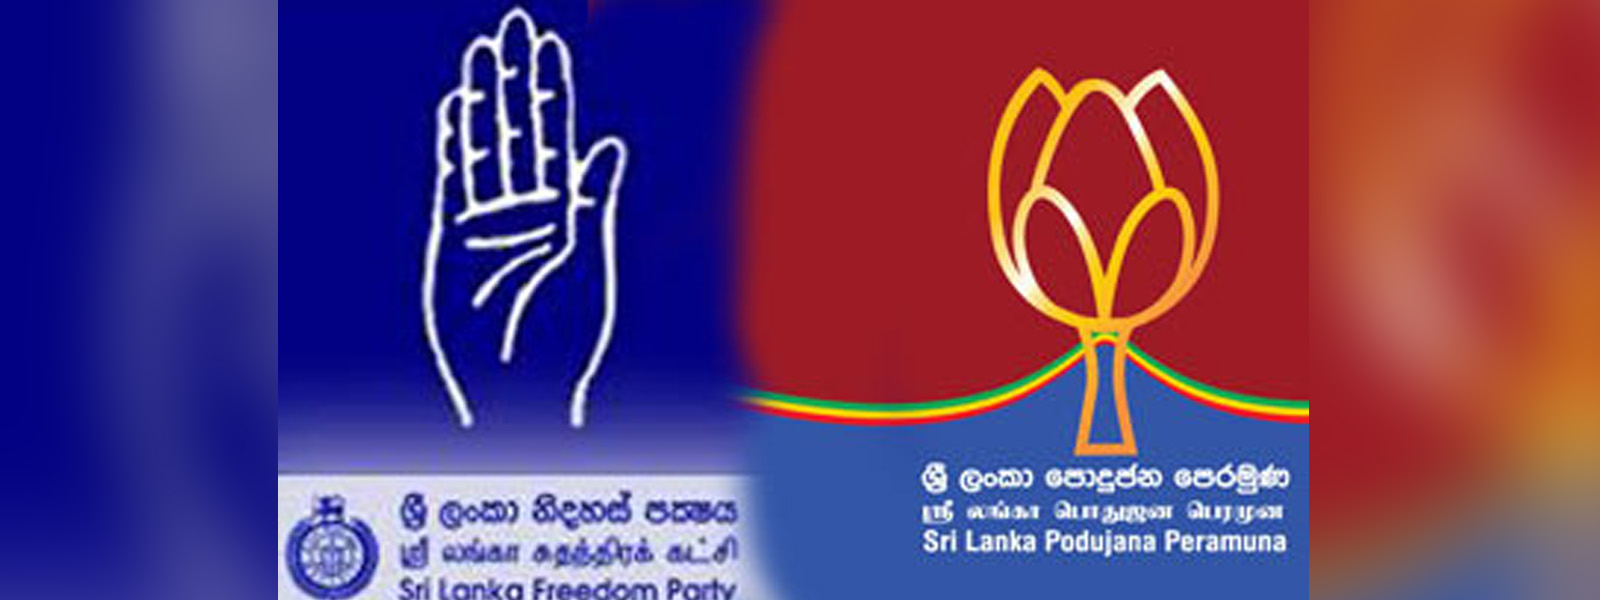 SLFP and SLPP to hold another meeting